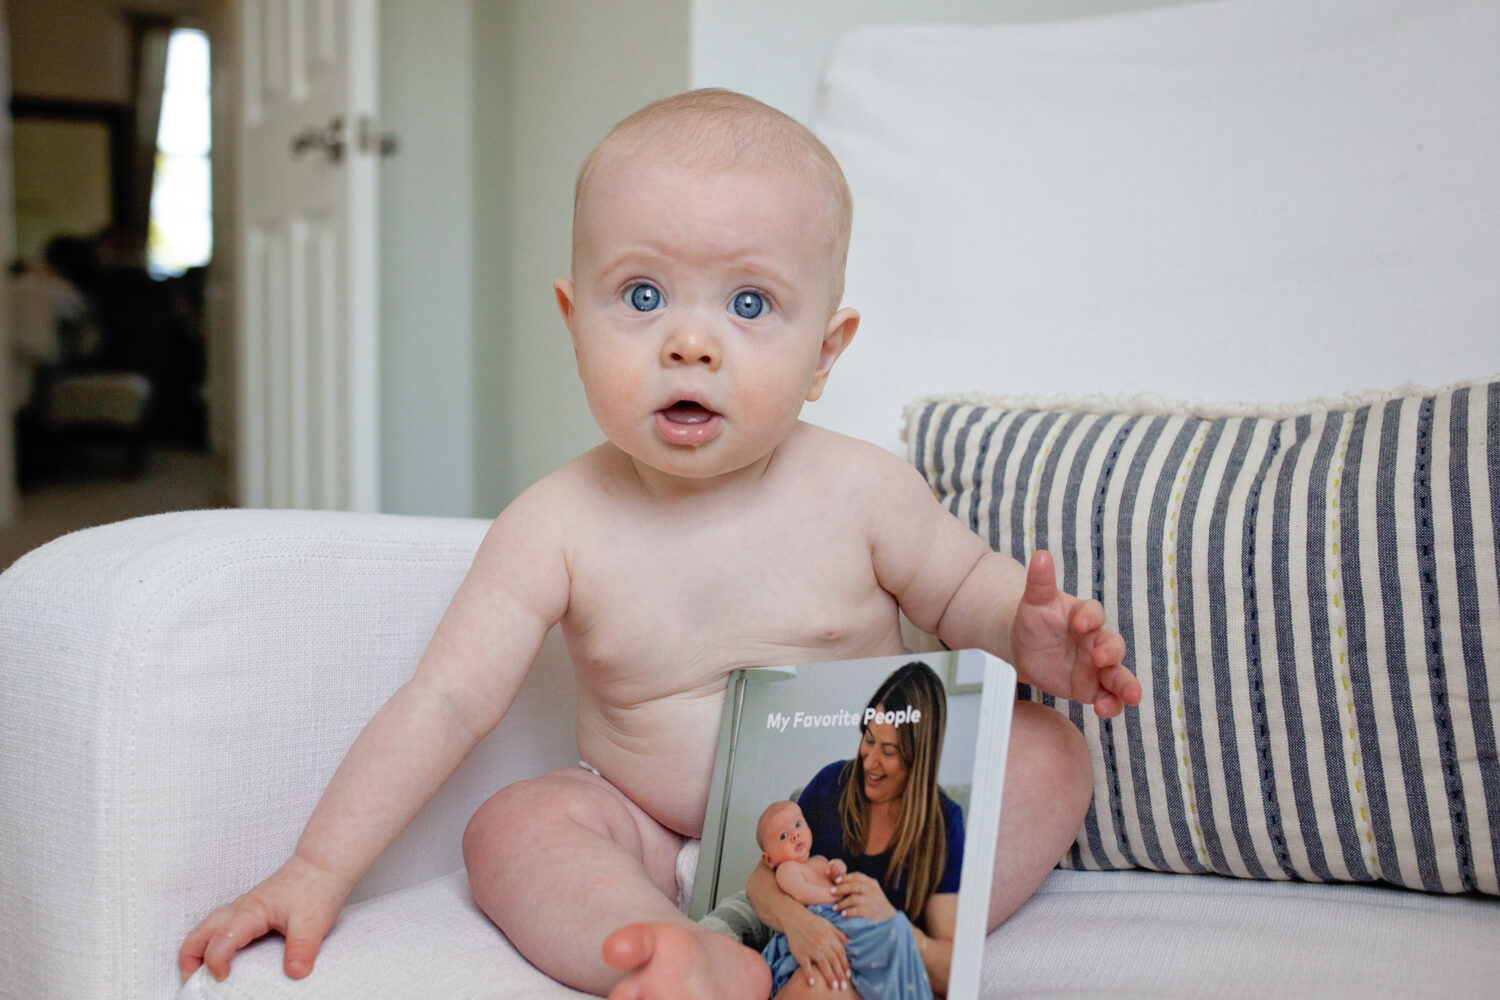 Baby holding album with images of his family and himself as a newborn. Images by Audrey blake Photorgaphy